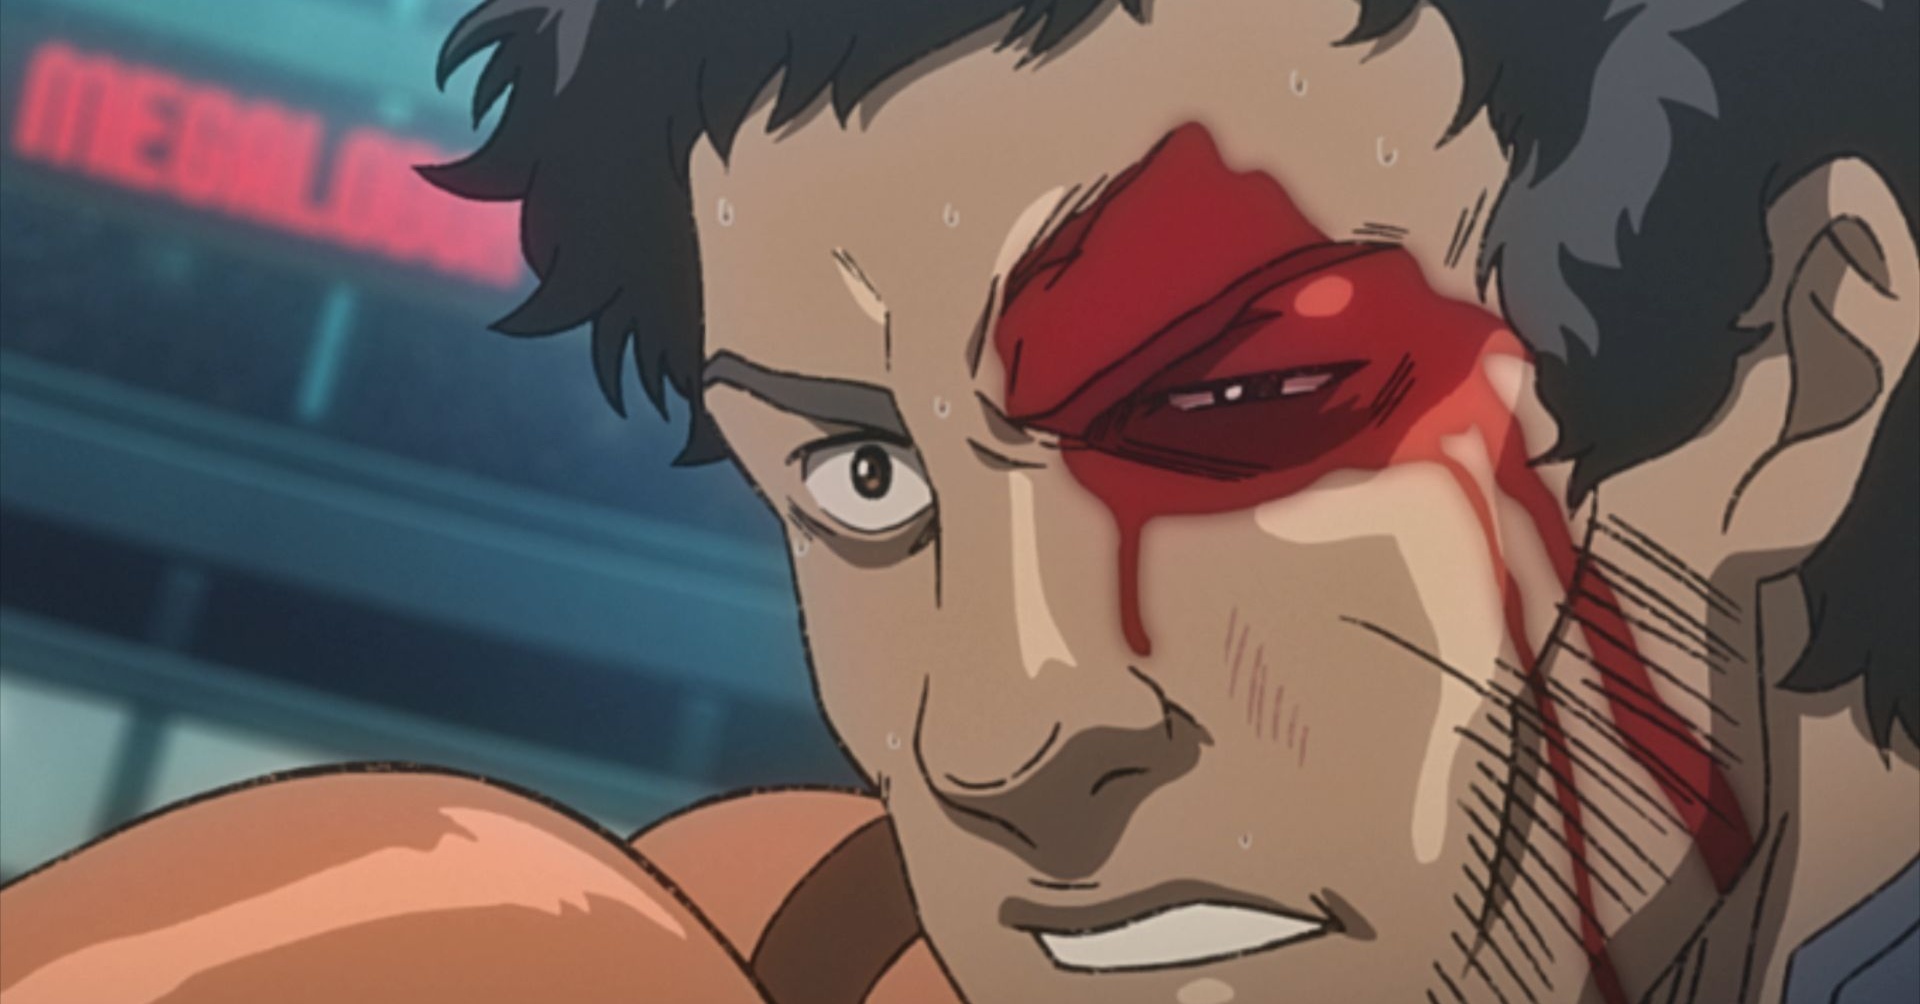 Mac Bleeding During The Match - Nomad Megalo Box 2